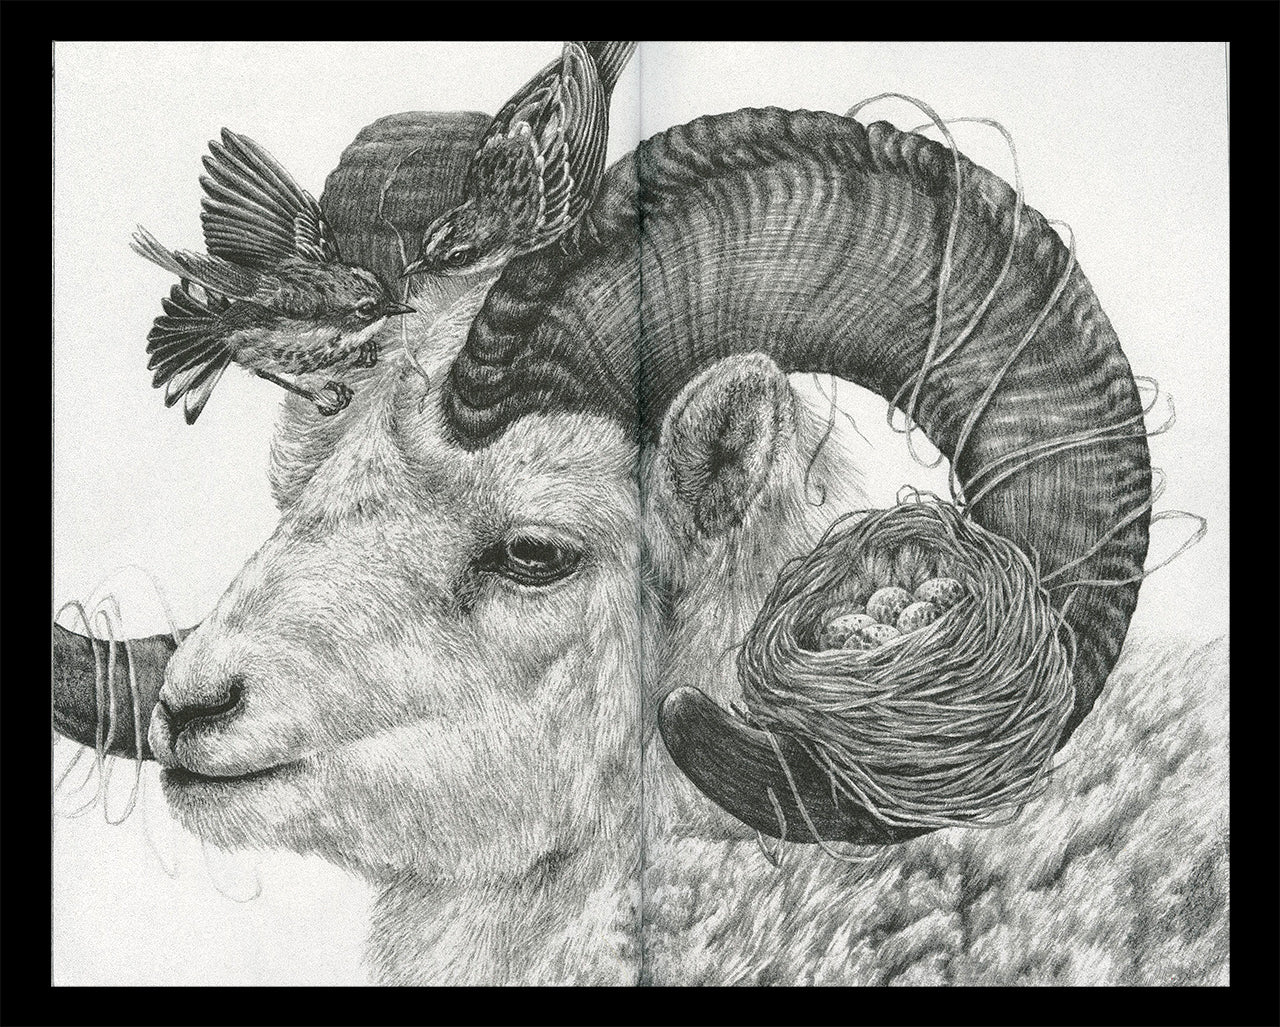 Interior spread of Zoe Keller's zine "Drawings" showing a graphite drawing of a ram